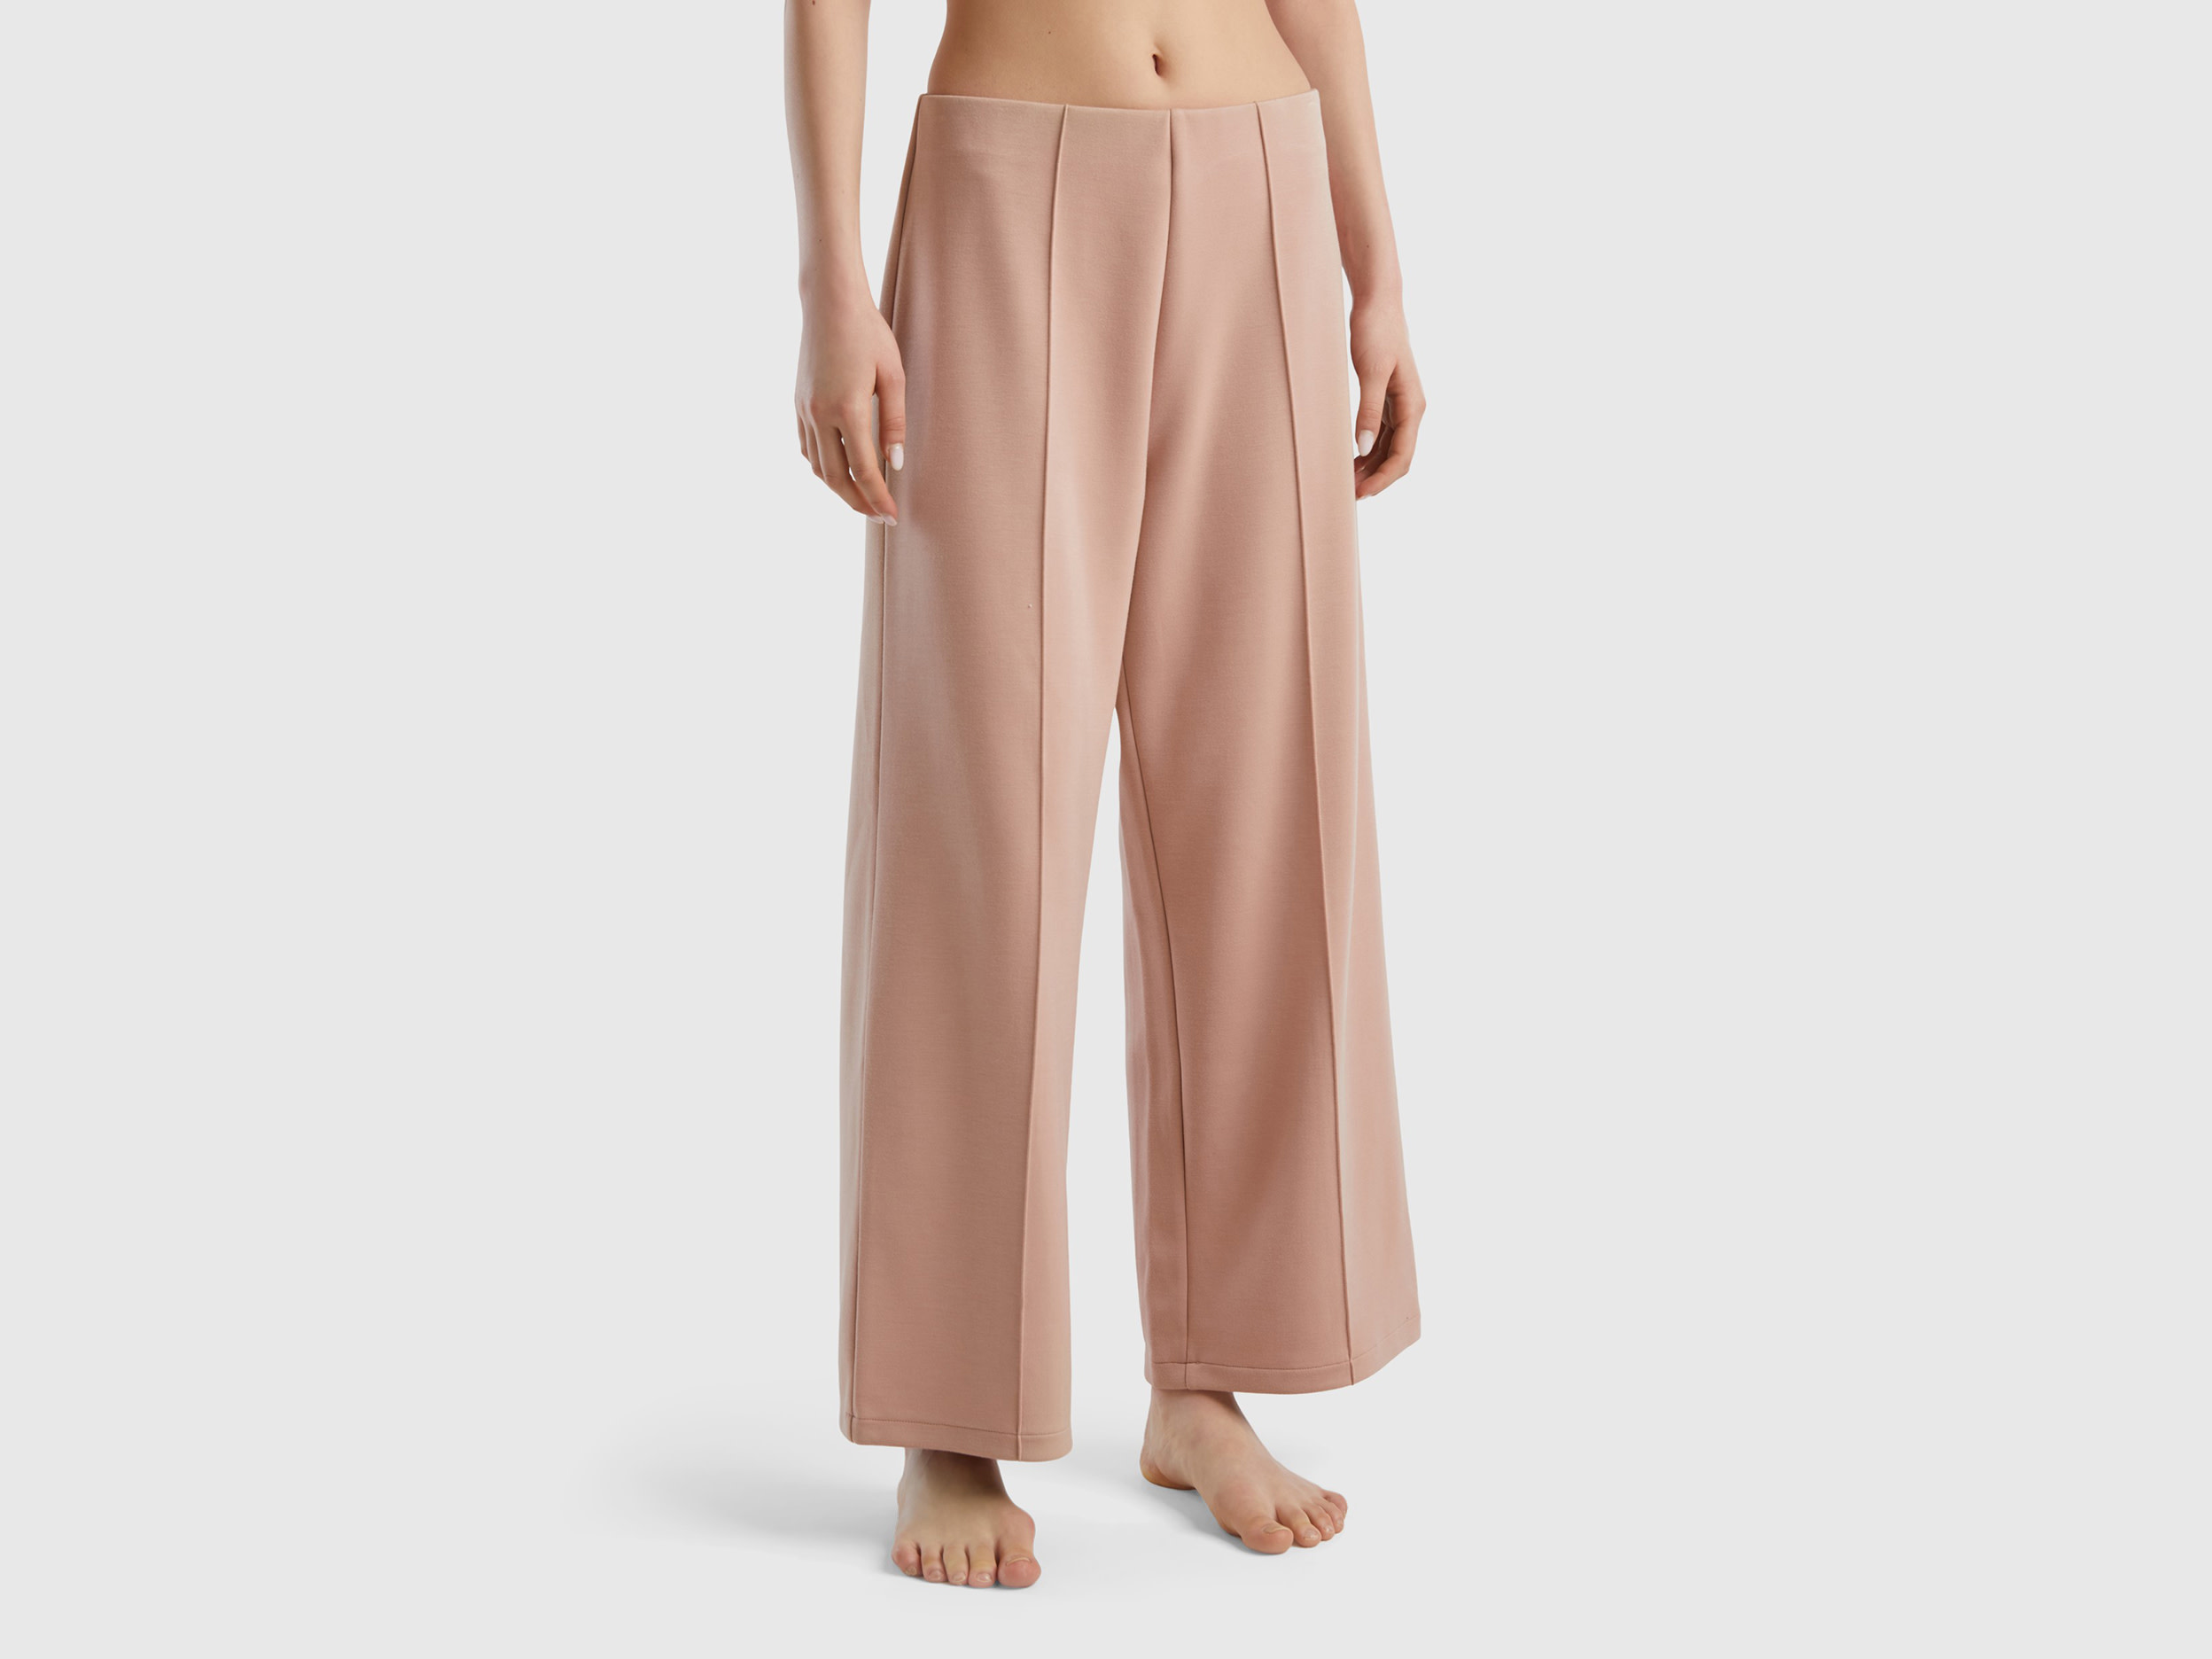 Benetton, High-waisted Palazzo Trousers, size M, Nude, Women